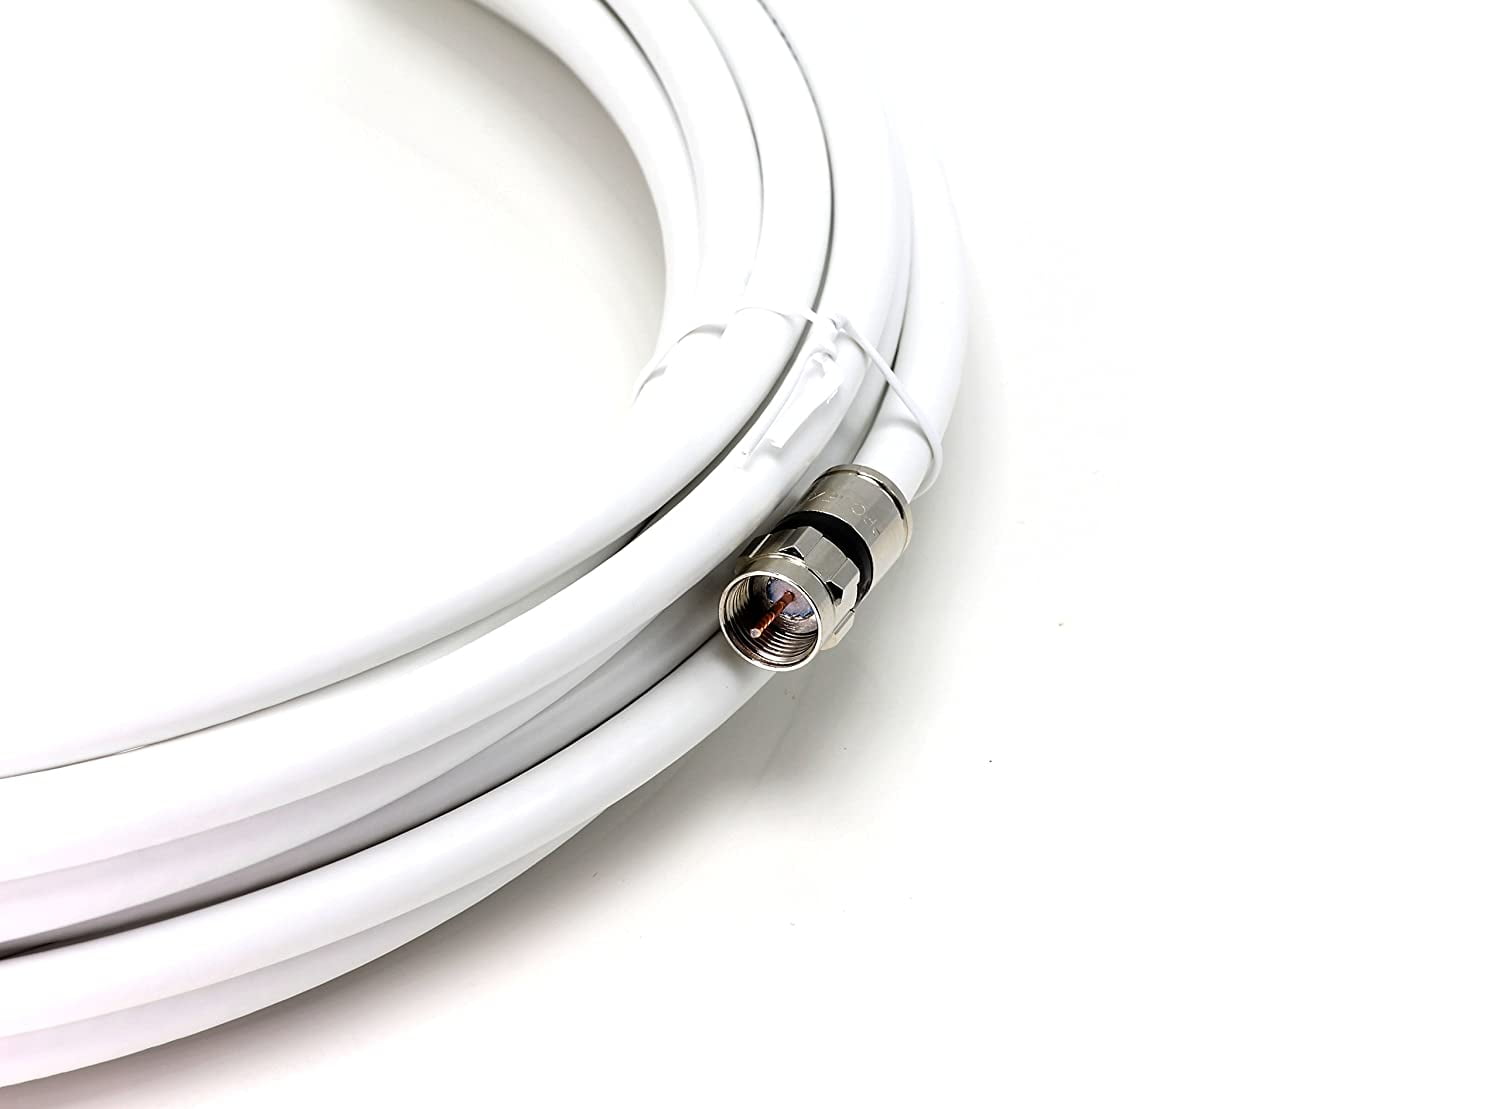 AV White RG6 Coaxial Cable F81 / RF Digital Coax Antenna and Satellite 75 Feet CL2 Rated Coax Cable - Made in The USA CableTV 75 Foot with Connectors THE CIMPLE CO 